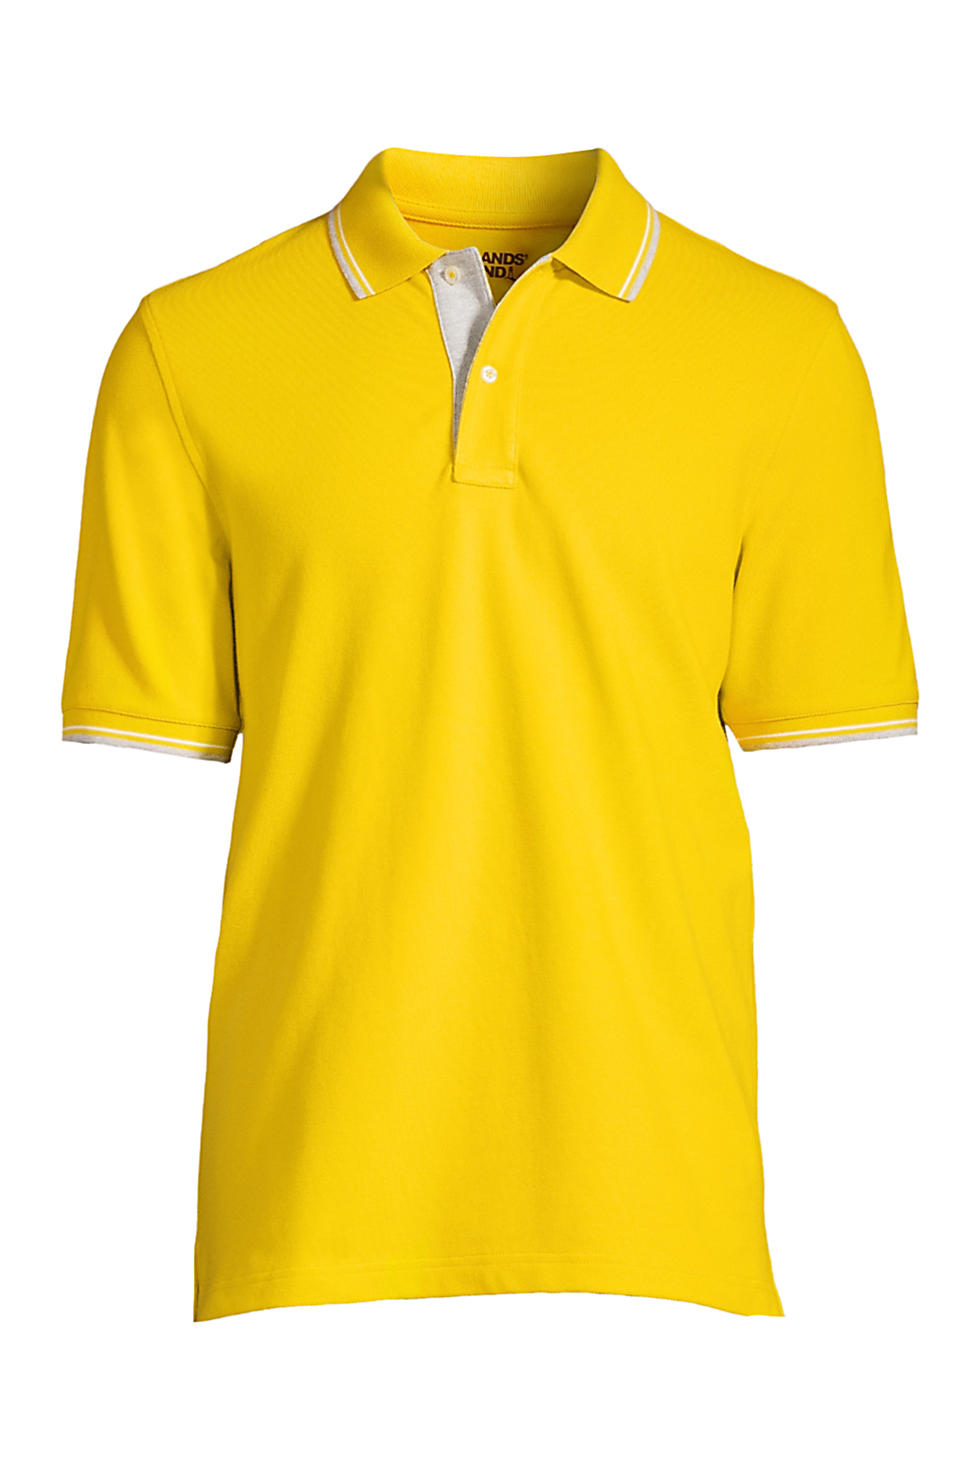 Lands End Men's Short Sleeve Comfort-First Mesh Polo Shirt (Athletic Gold)